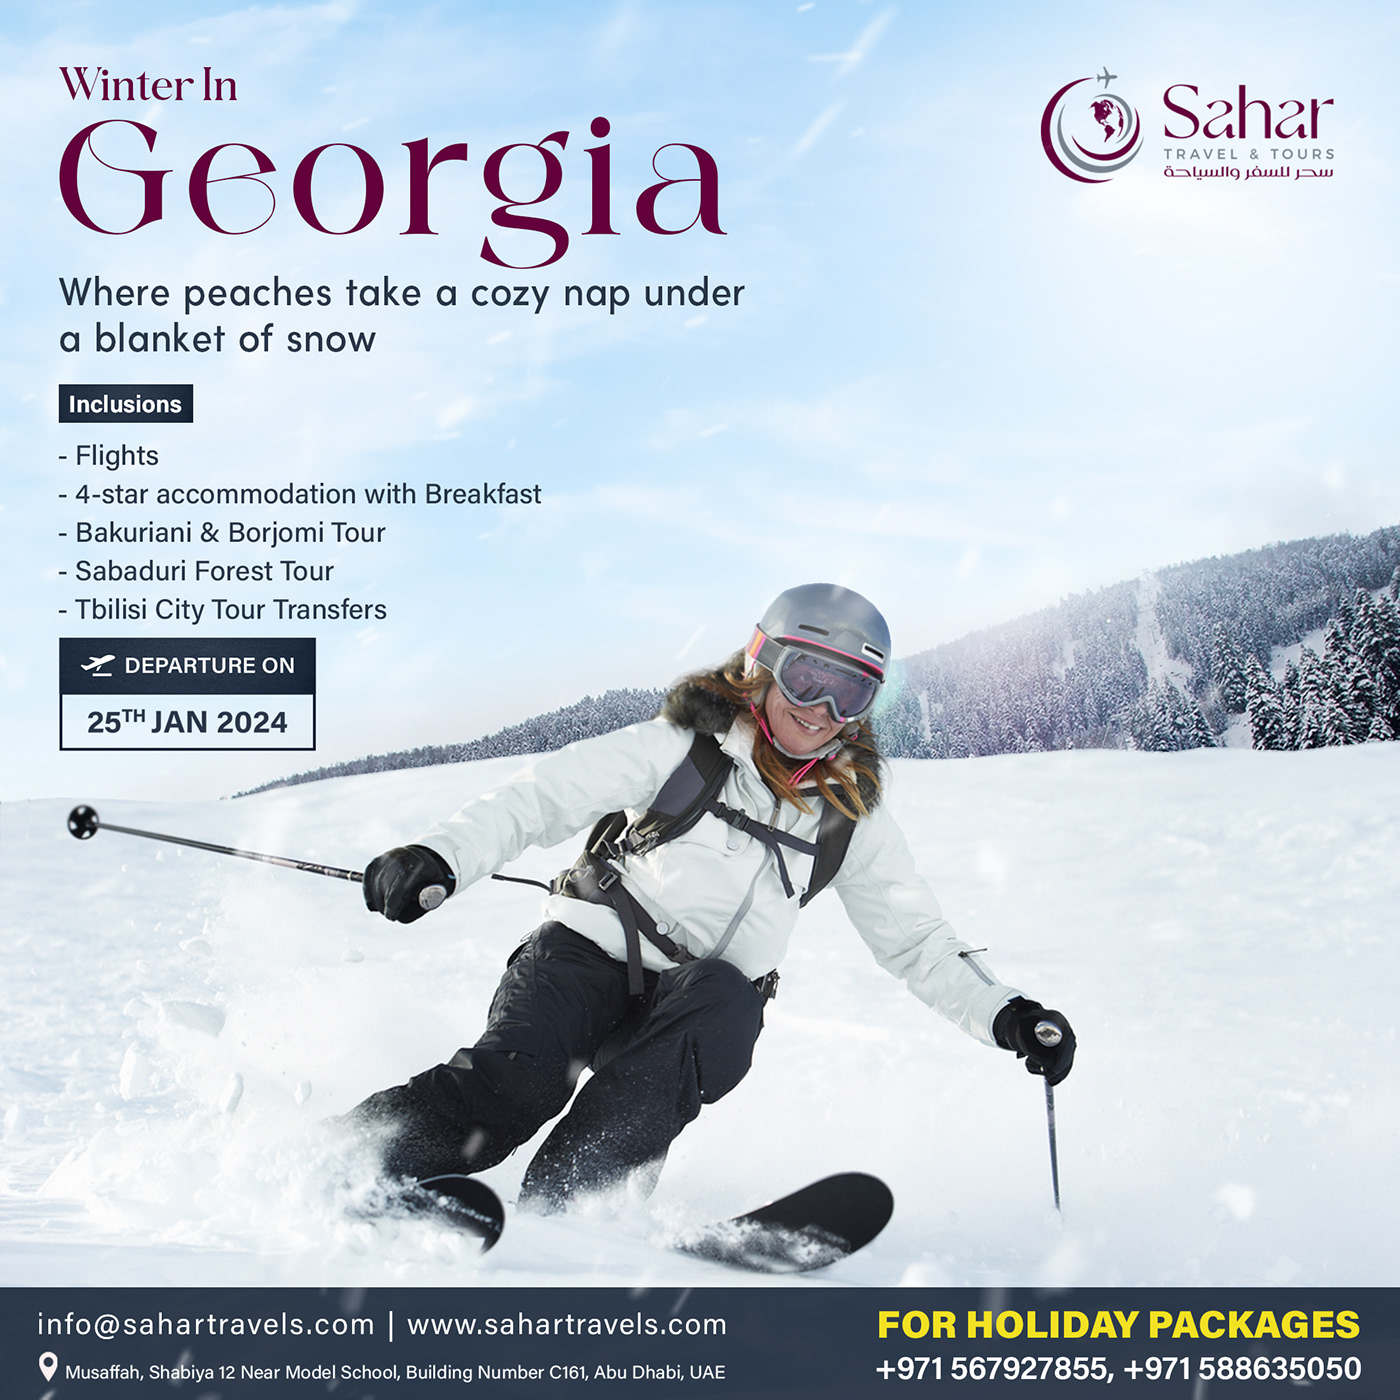 Georgia Winter Adventure Tour Package
Winter Tour Package Creative Posters, UAE